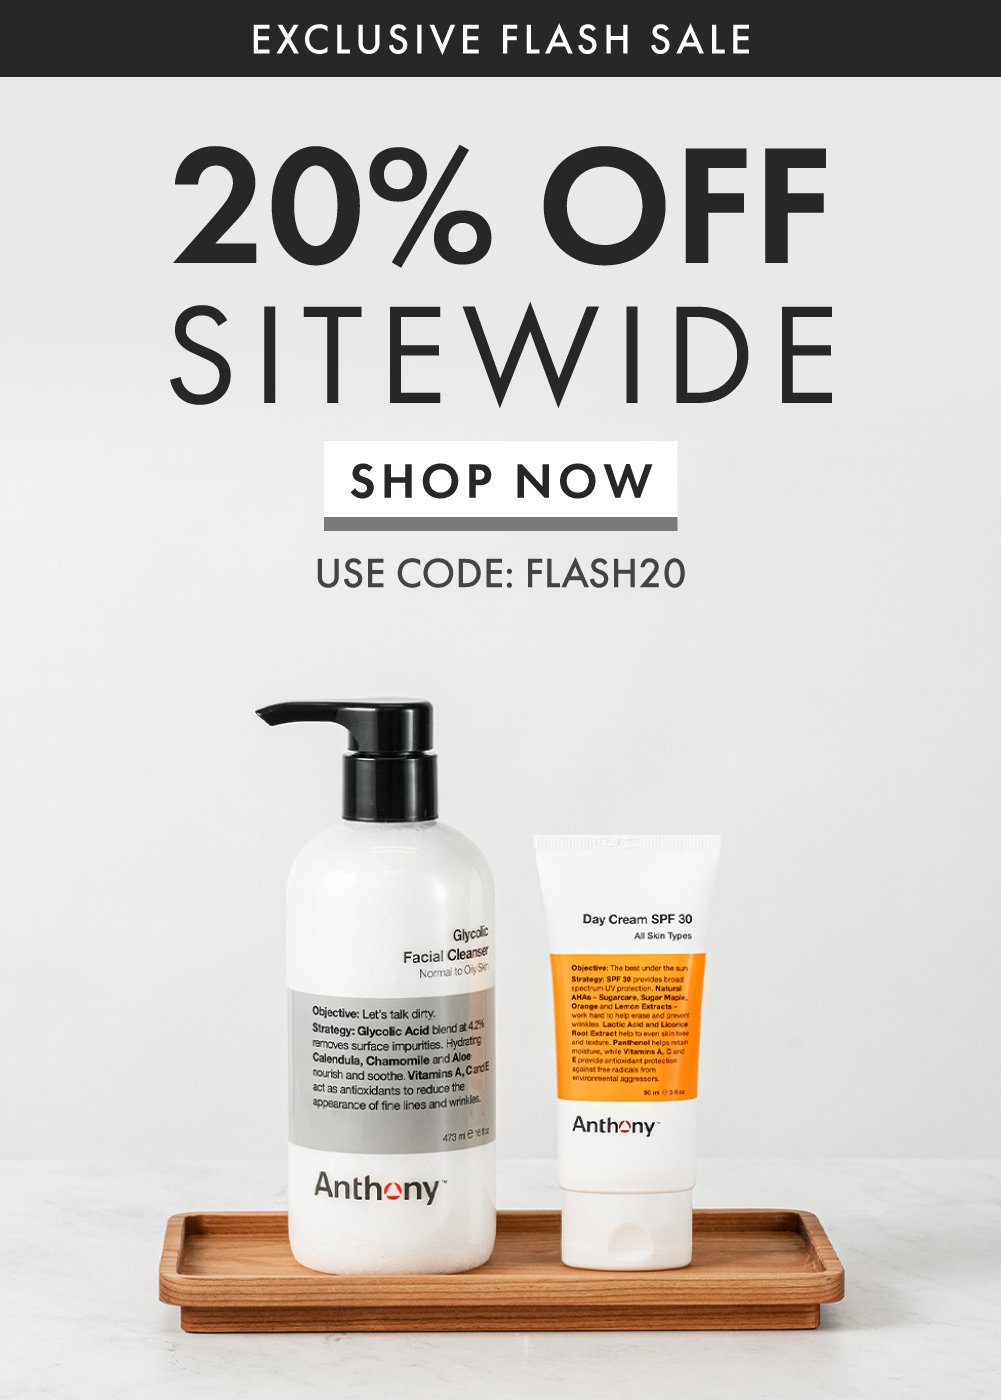 Today Only 20% Off Site-Wide Flash Sale! Use Code: FLASH20